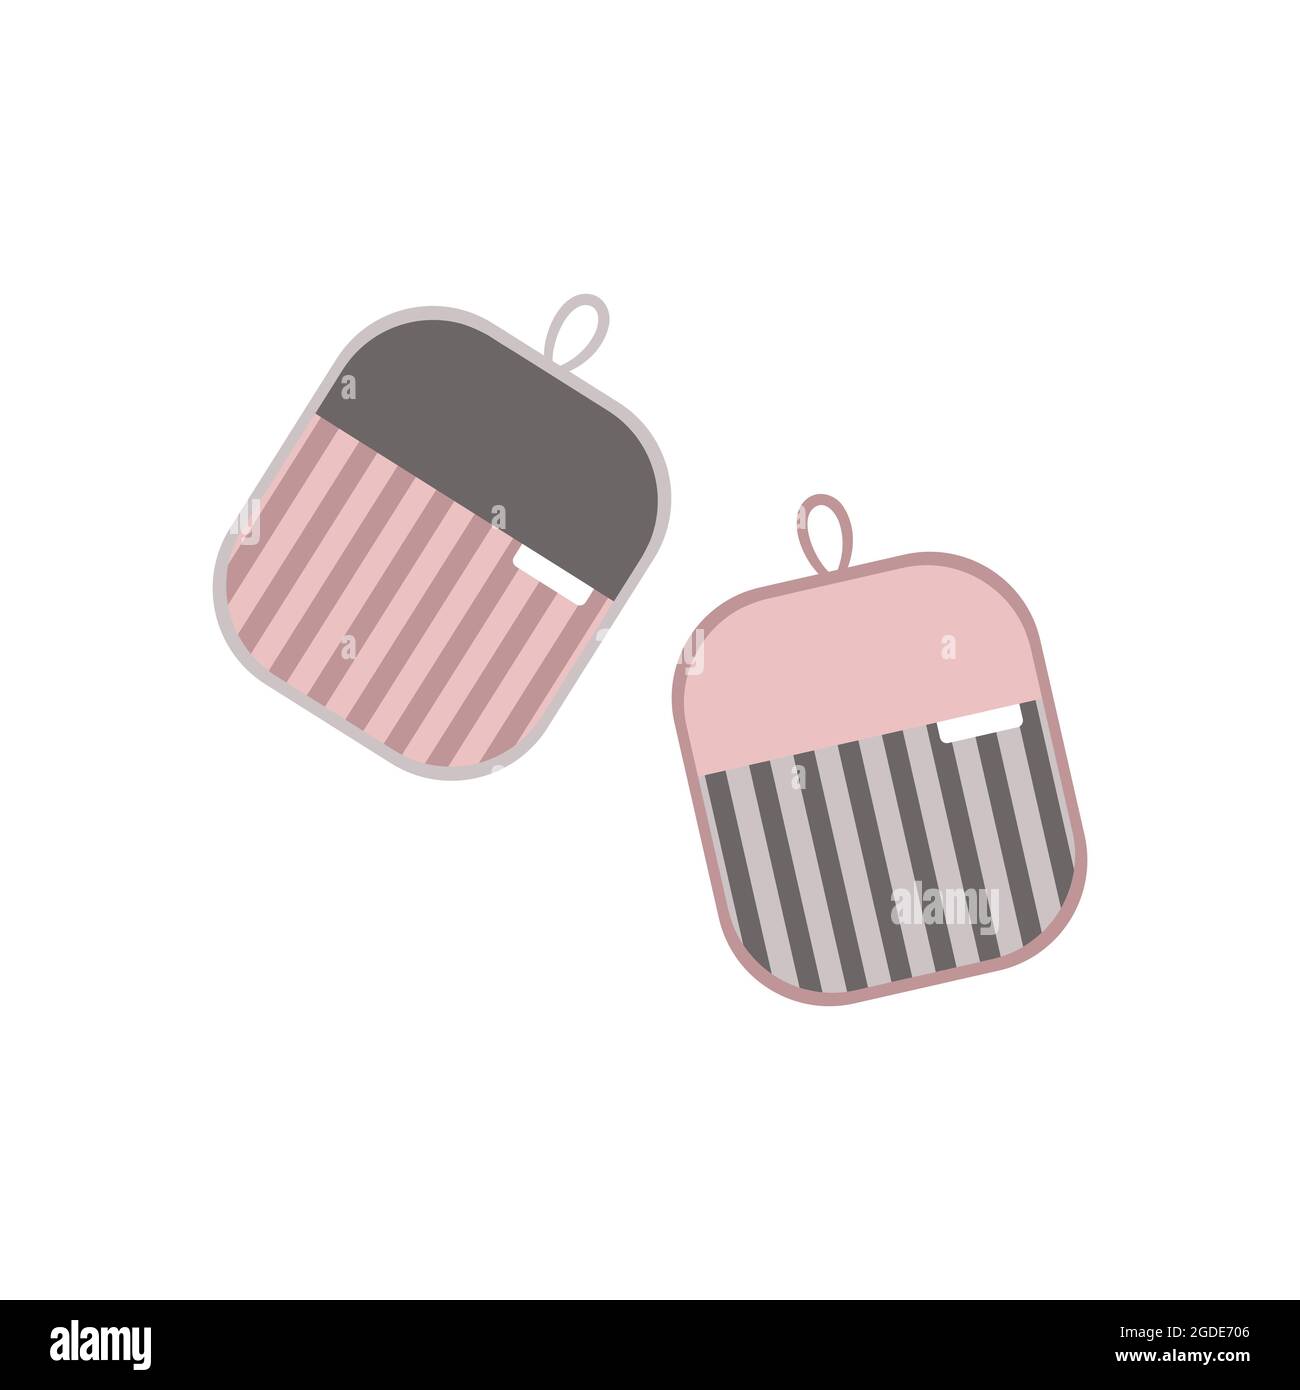 Potholder with a pattern for protection against hot cooking. Kitchen item Stock Vector